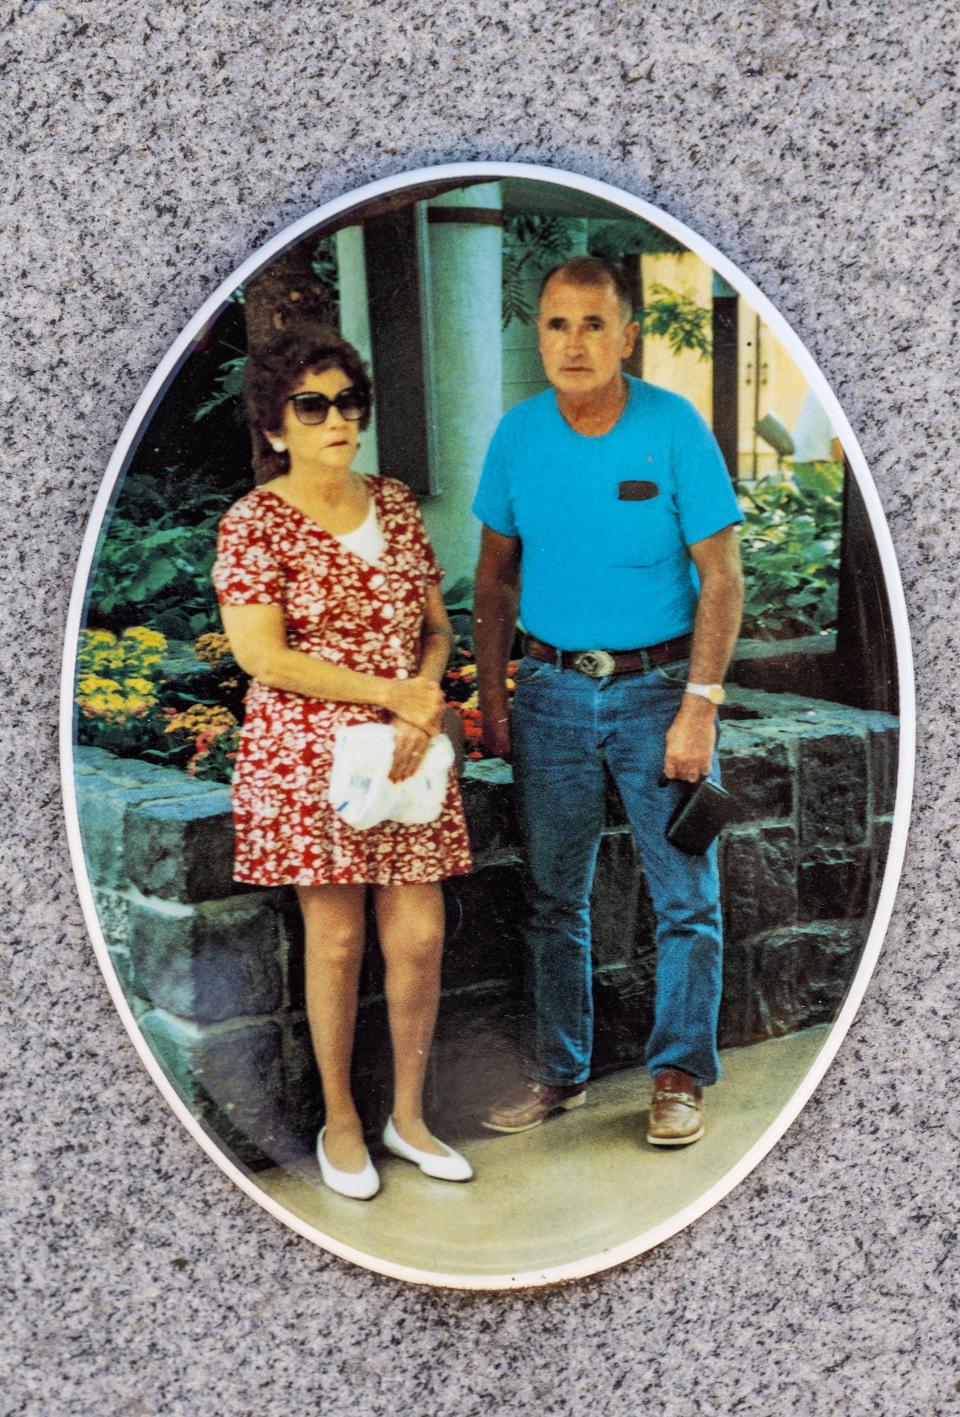 A photo of Anna Studey with her husband, Donald Studey, on her gravestone near Thurman, Iowa, Wednesday, Oct. 26, 2022. According to his daughter, Donald Studey murdered "five or six" women a year and buried them in and around an abandoned well on his property.